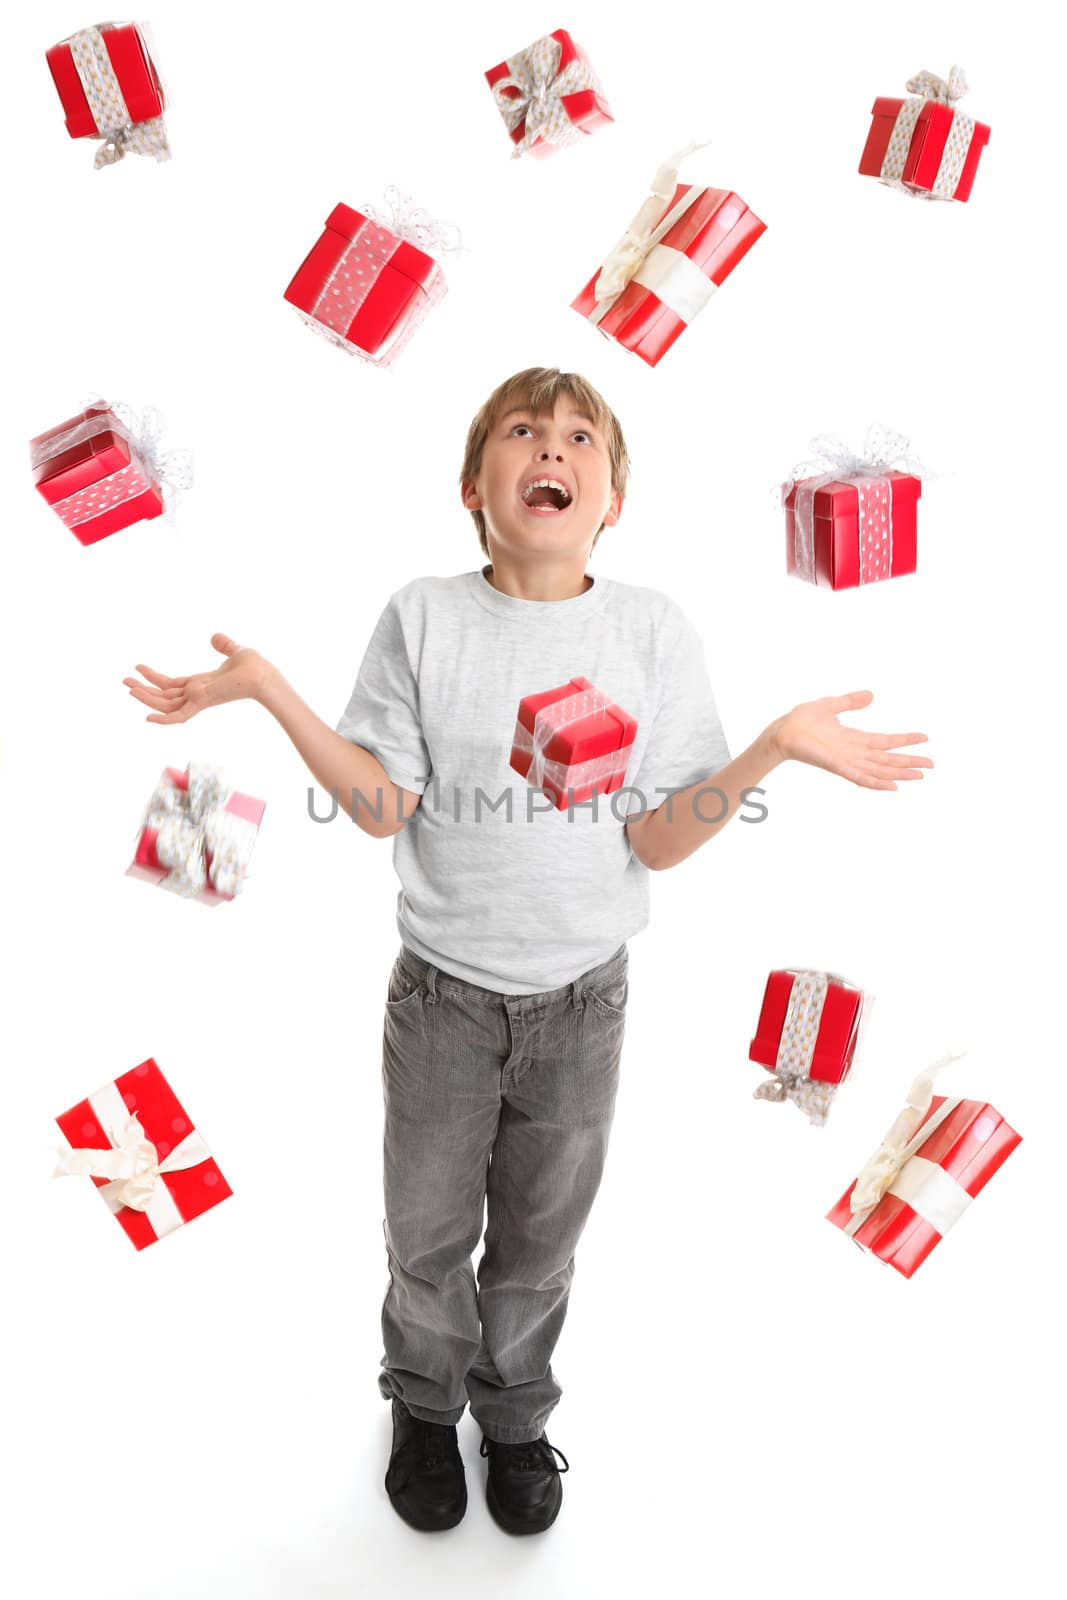 A child in awe at the abundance of gifts fallling around him like rain.